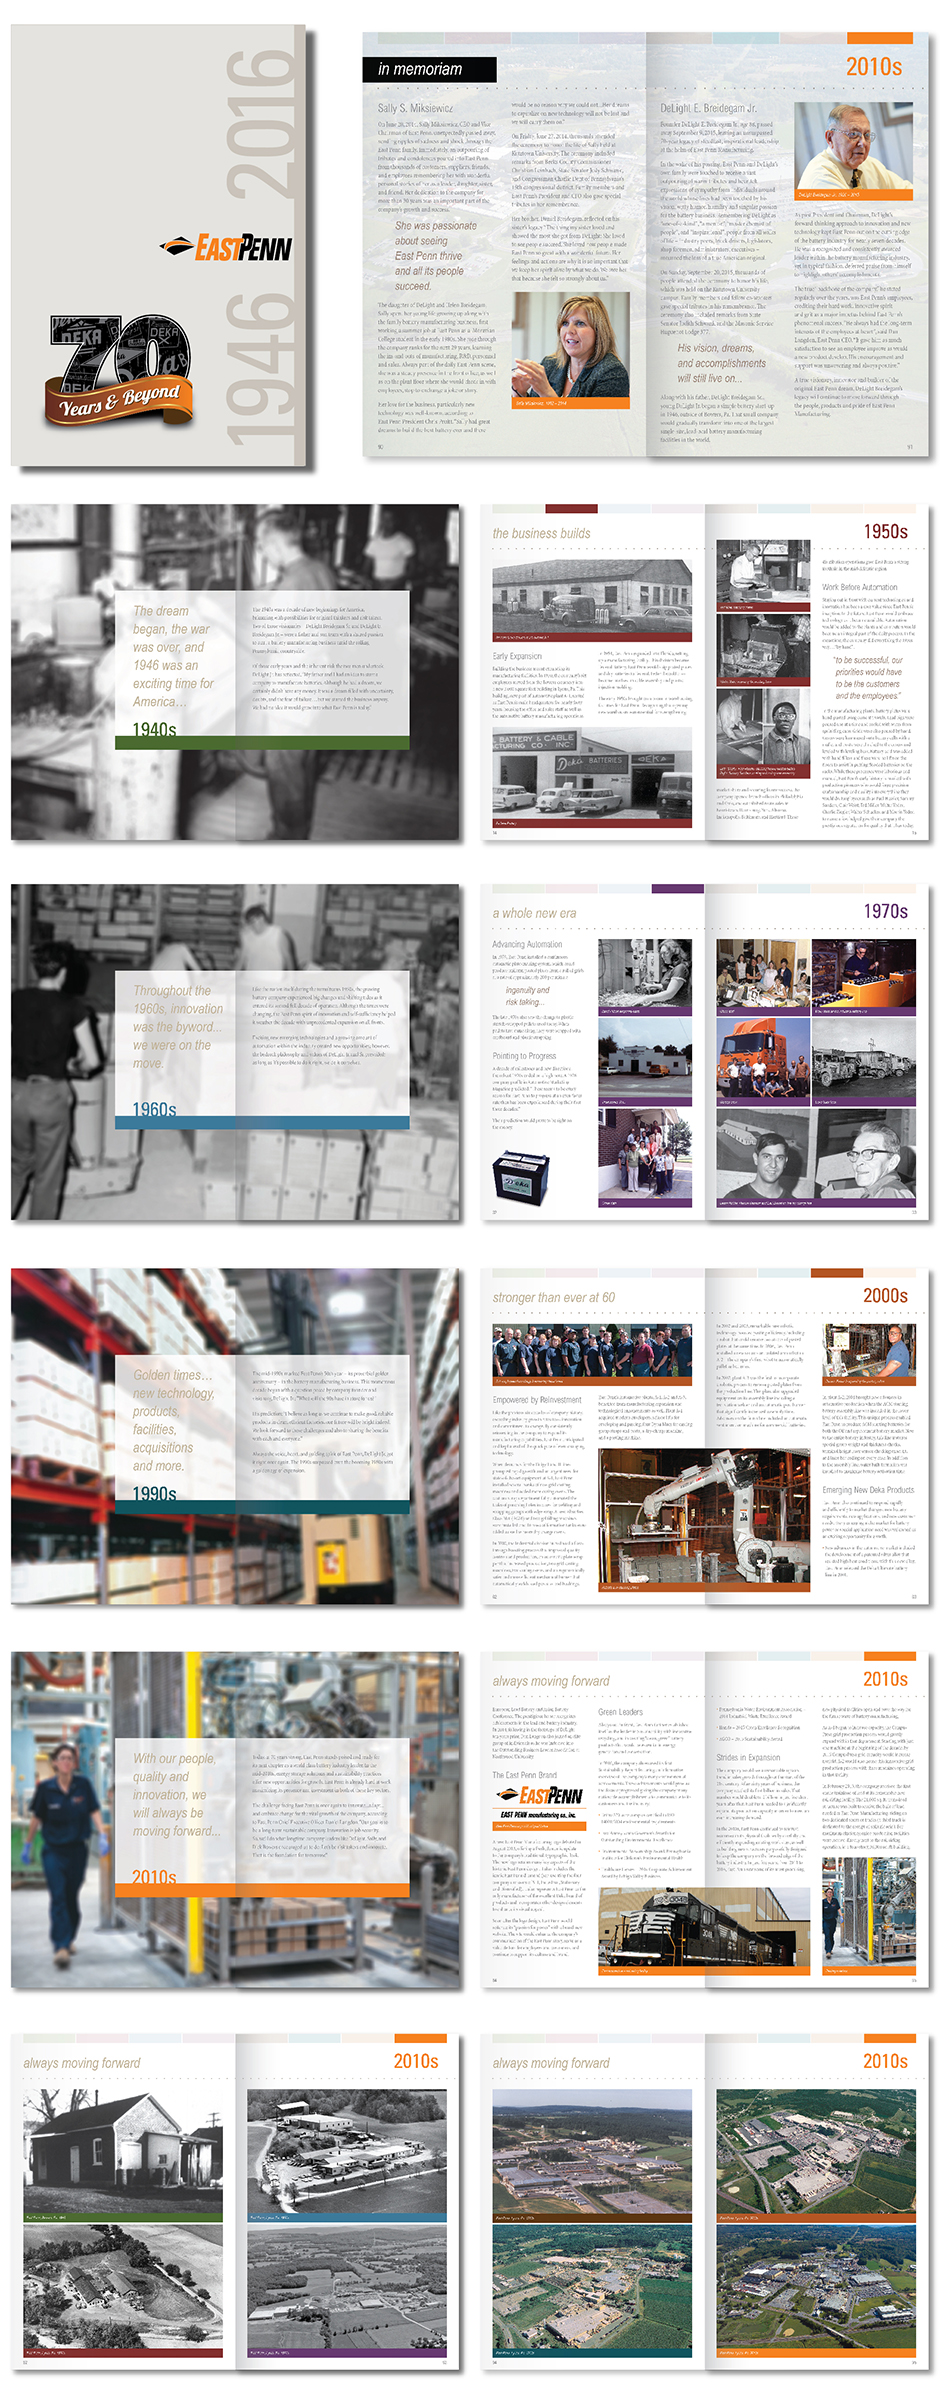 East Penn Manufacturing 70th Anniversary Book with Cover and Sample Page Spreads